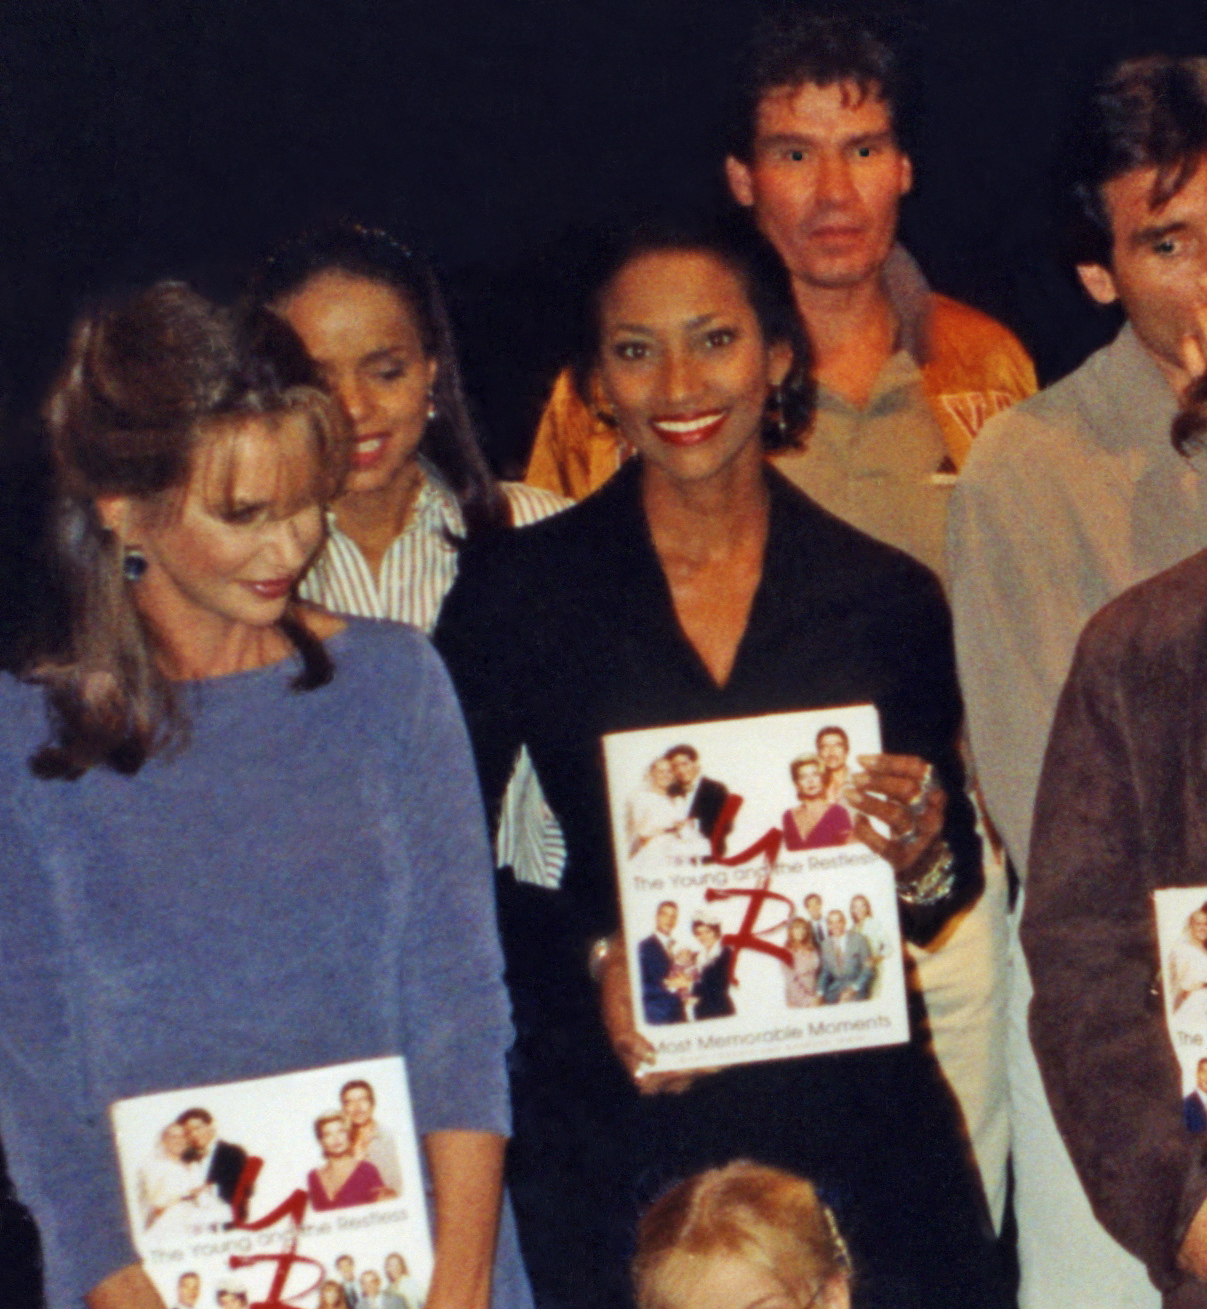 Pamella D'Pella at the Y & R book release Party. Also in this photo Jess Walton, Victoria Rowell, and Anthony Pena